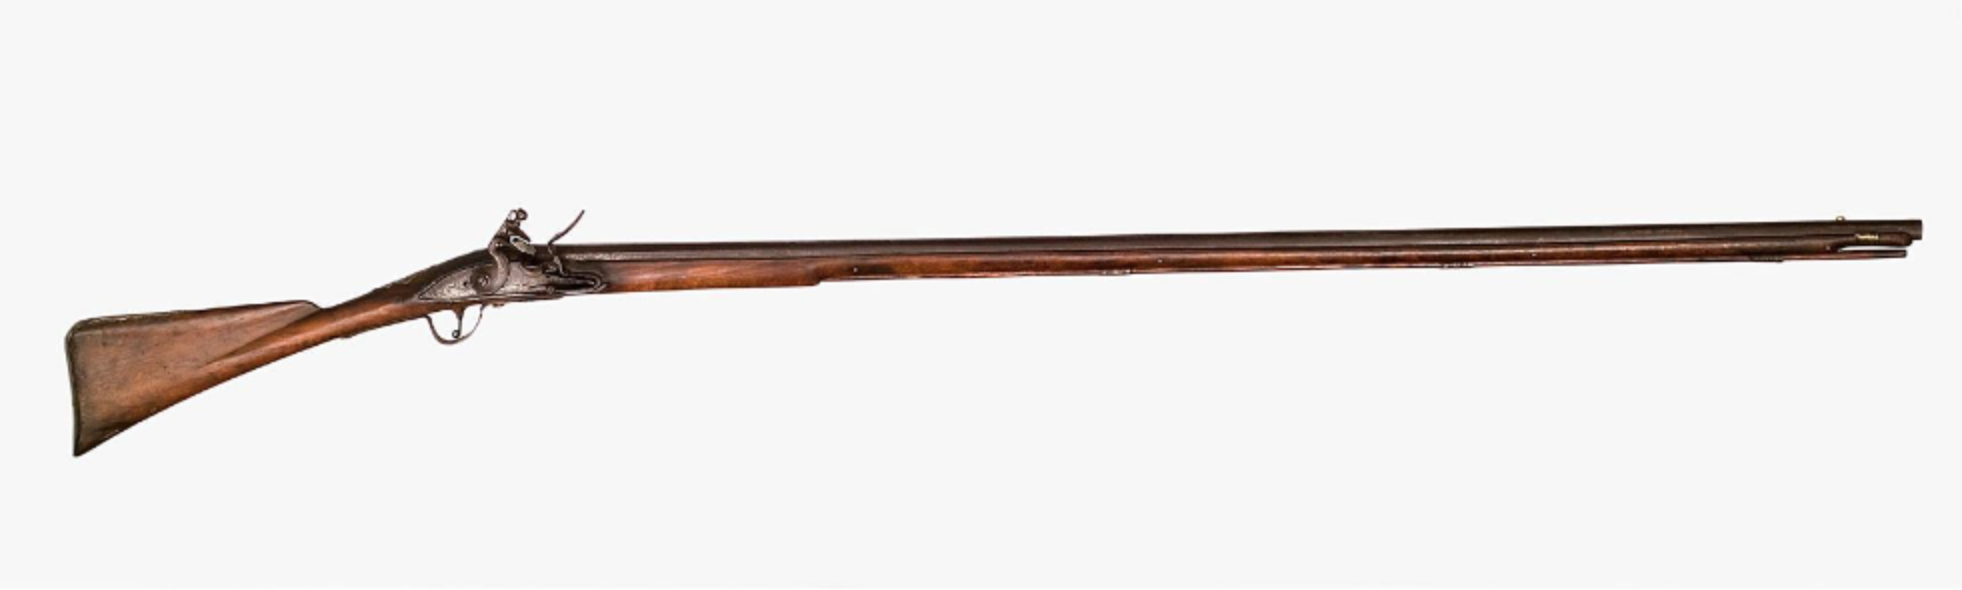 A simple fusil musket displayed on a white background. 